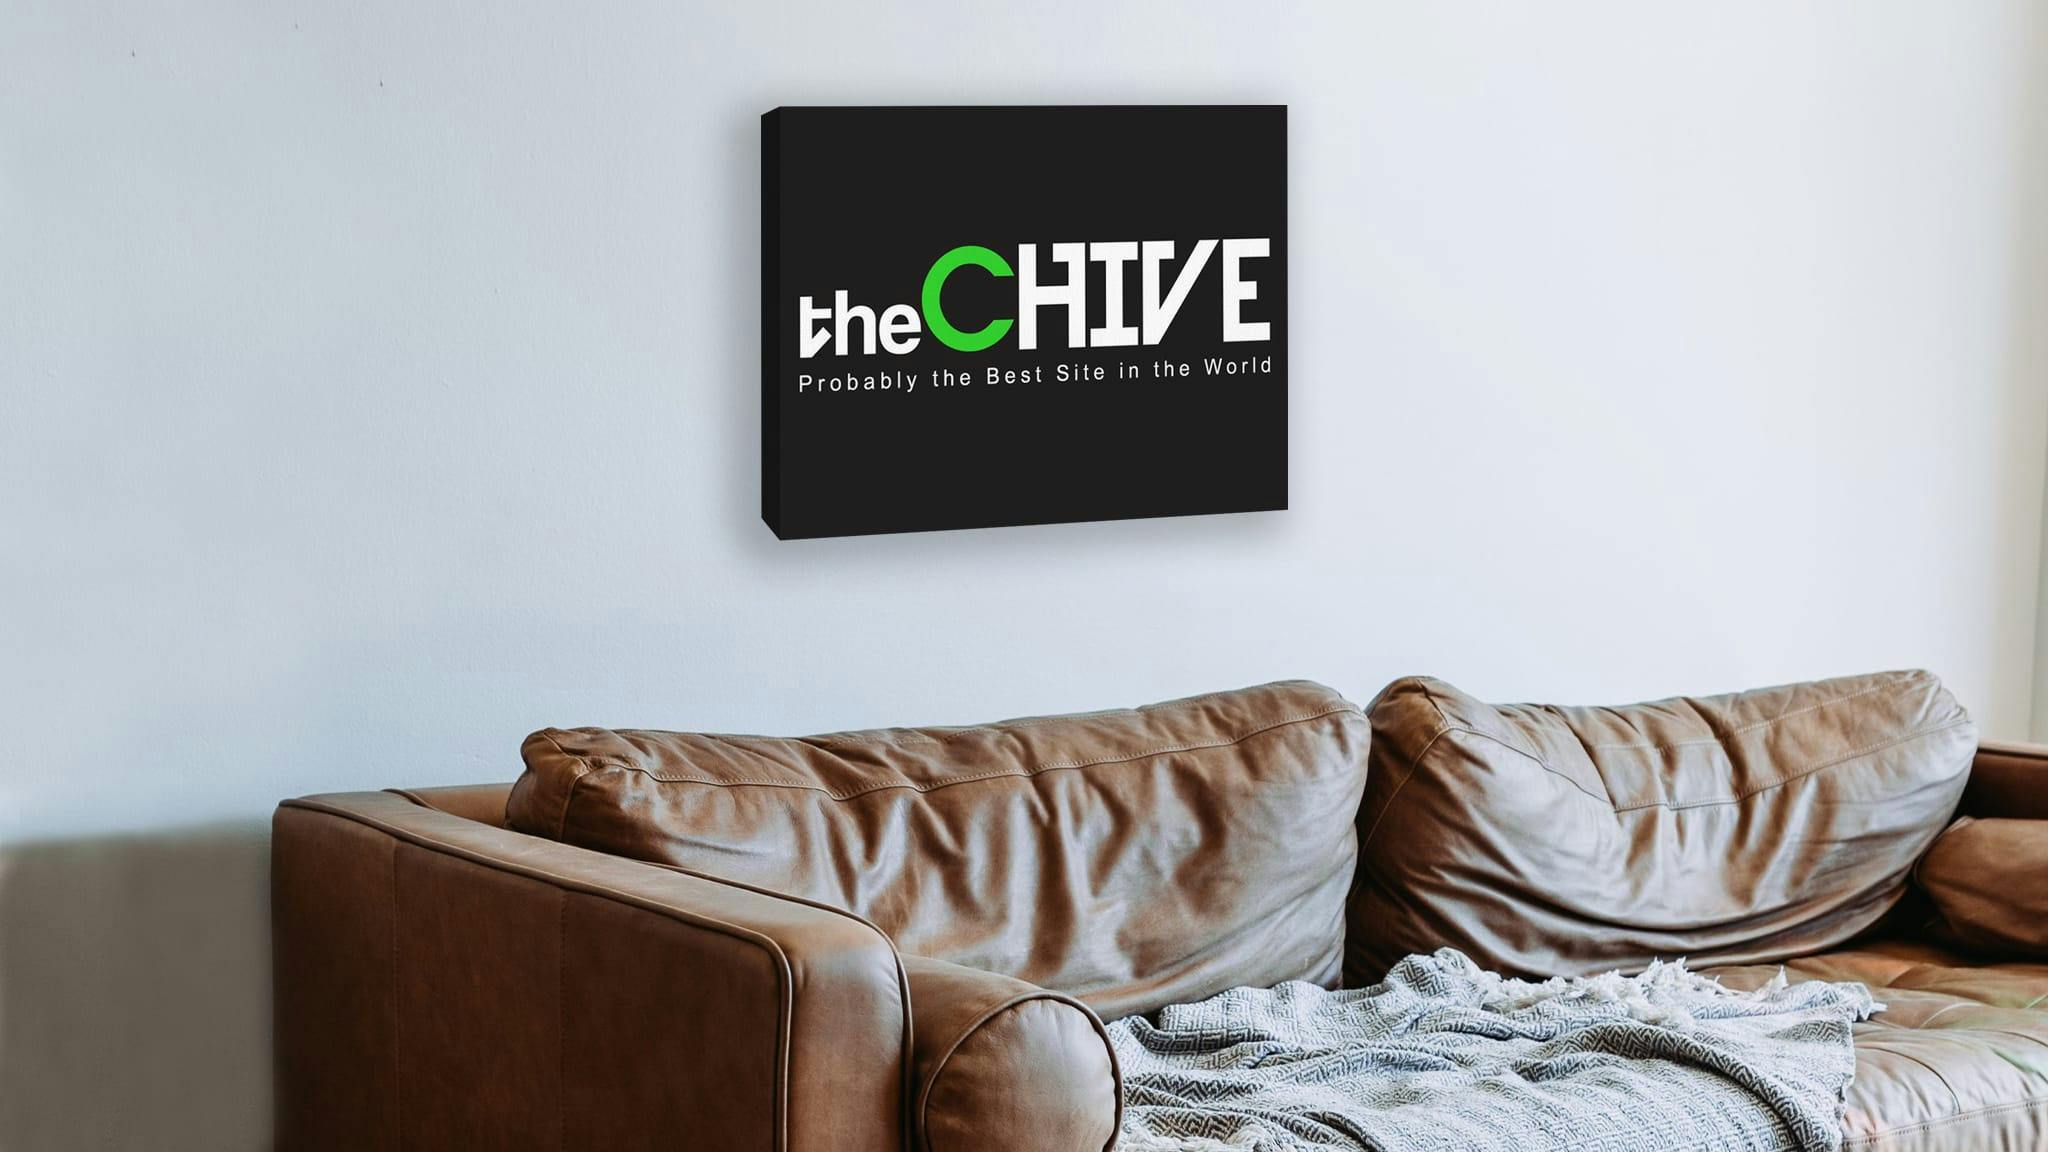 The chive pics